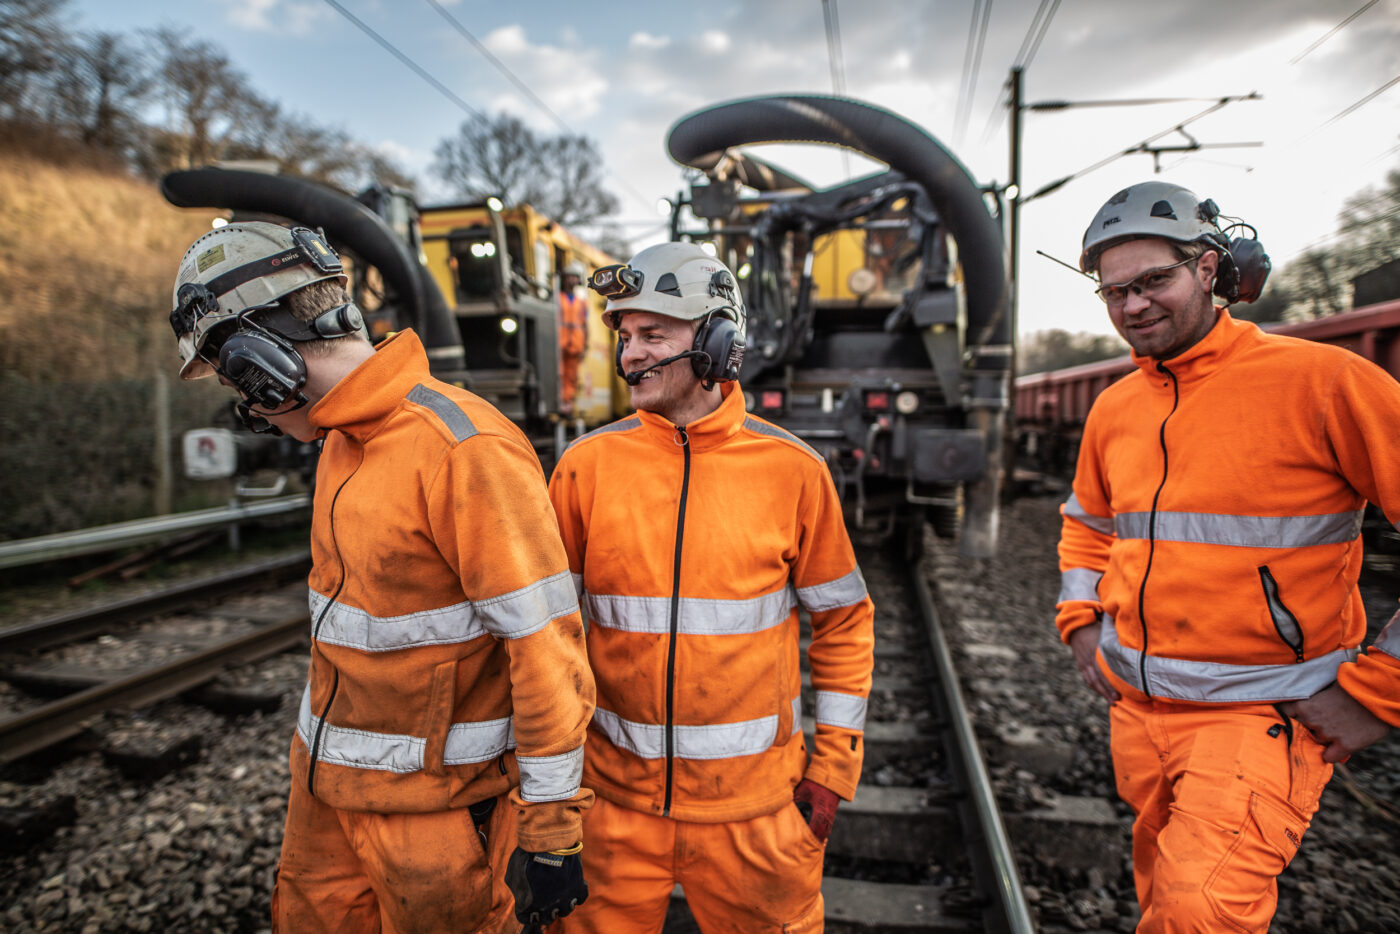 Railcare is making organisational changes within the contracting business